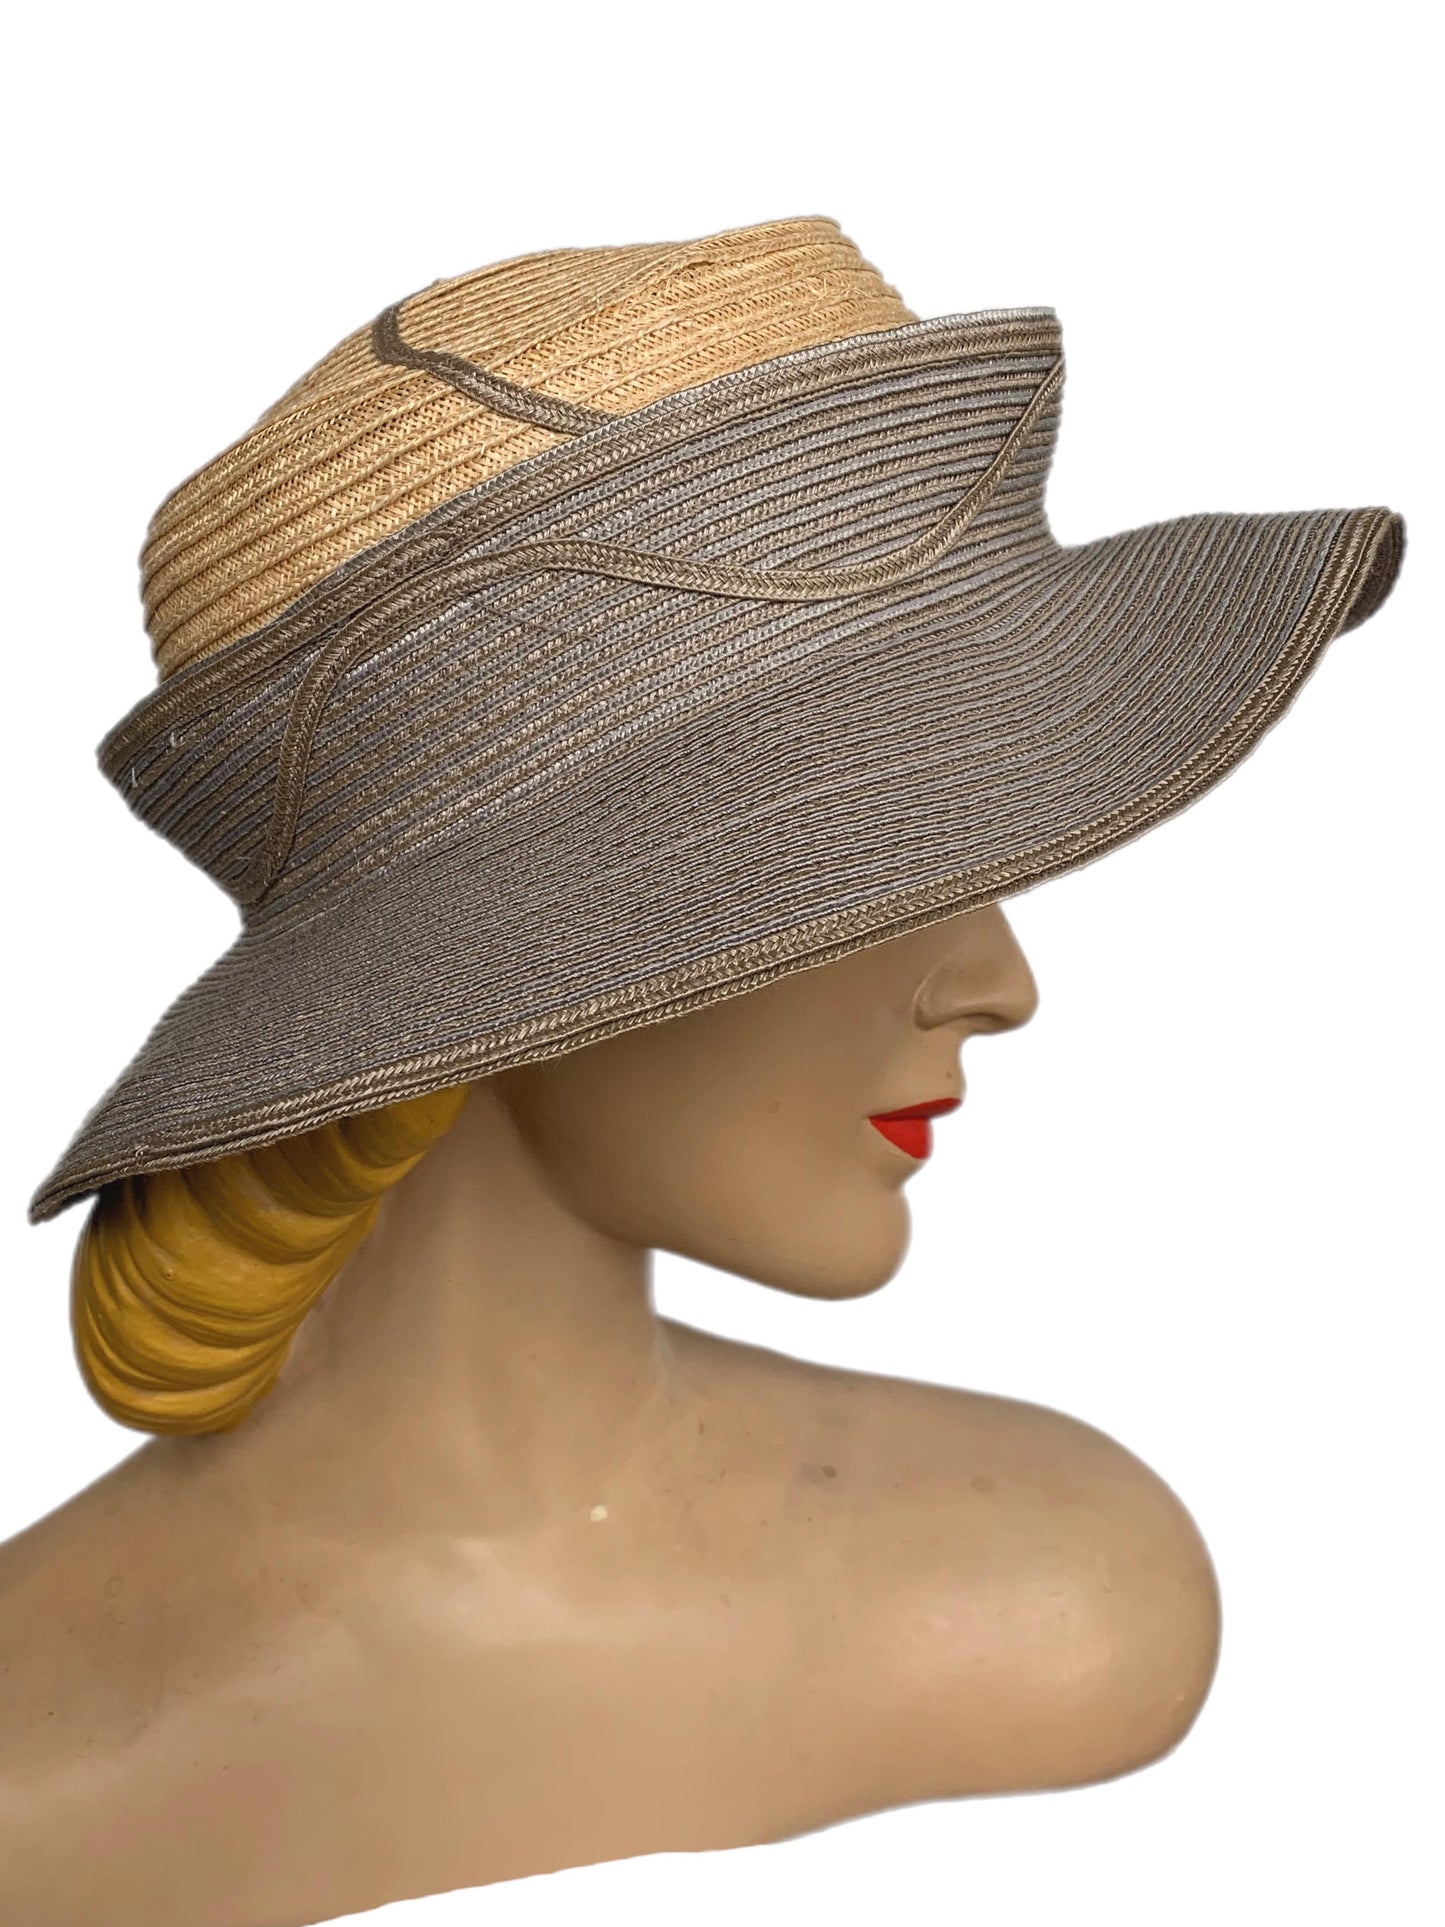 Edwardian Inspired Diane Harty Sculpted Sisal Hat